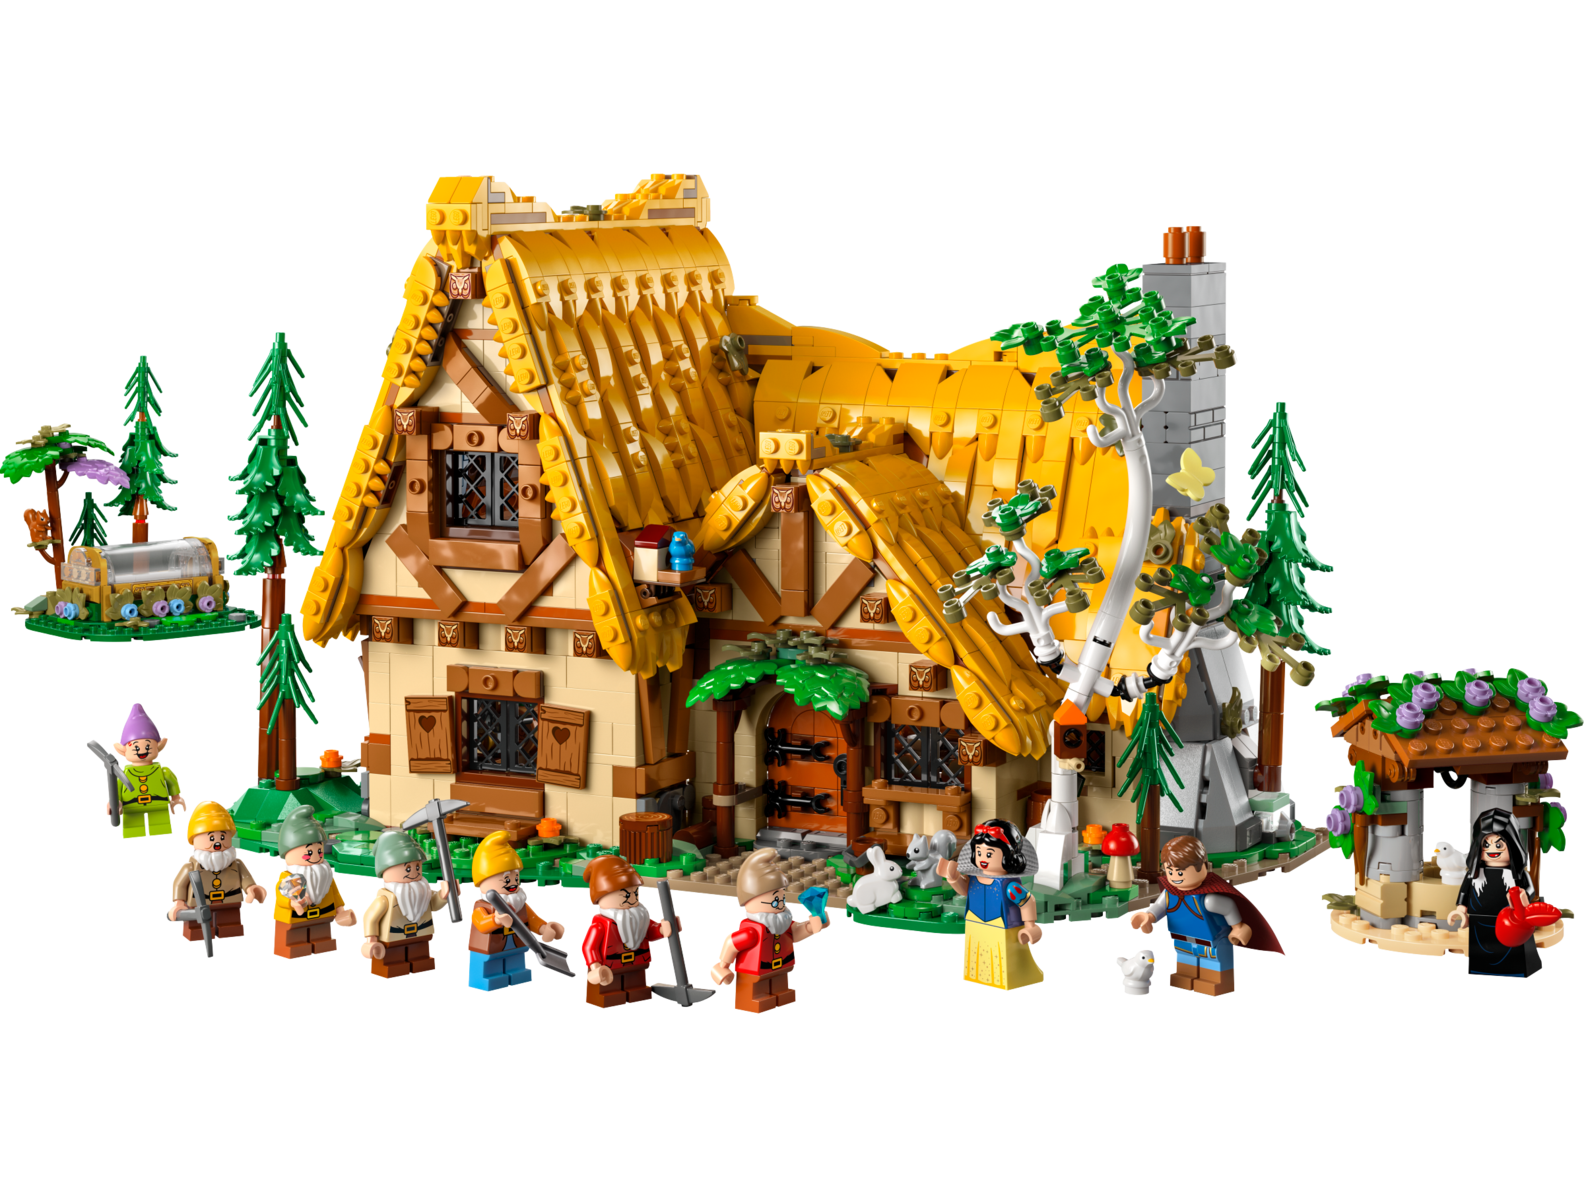 Snow White and the Seven Dwarfs' Cottage offers at £189.99 in LEGO Shop